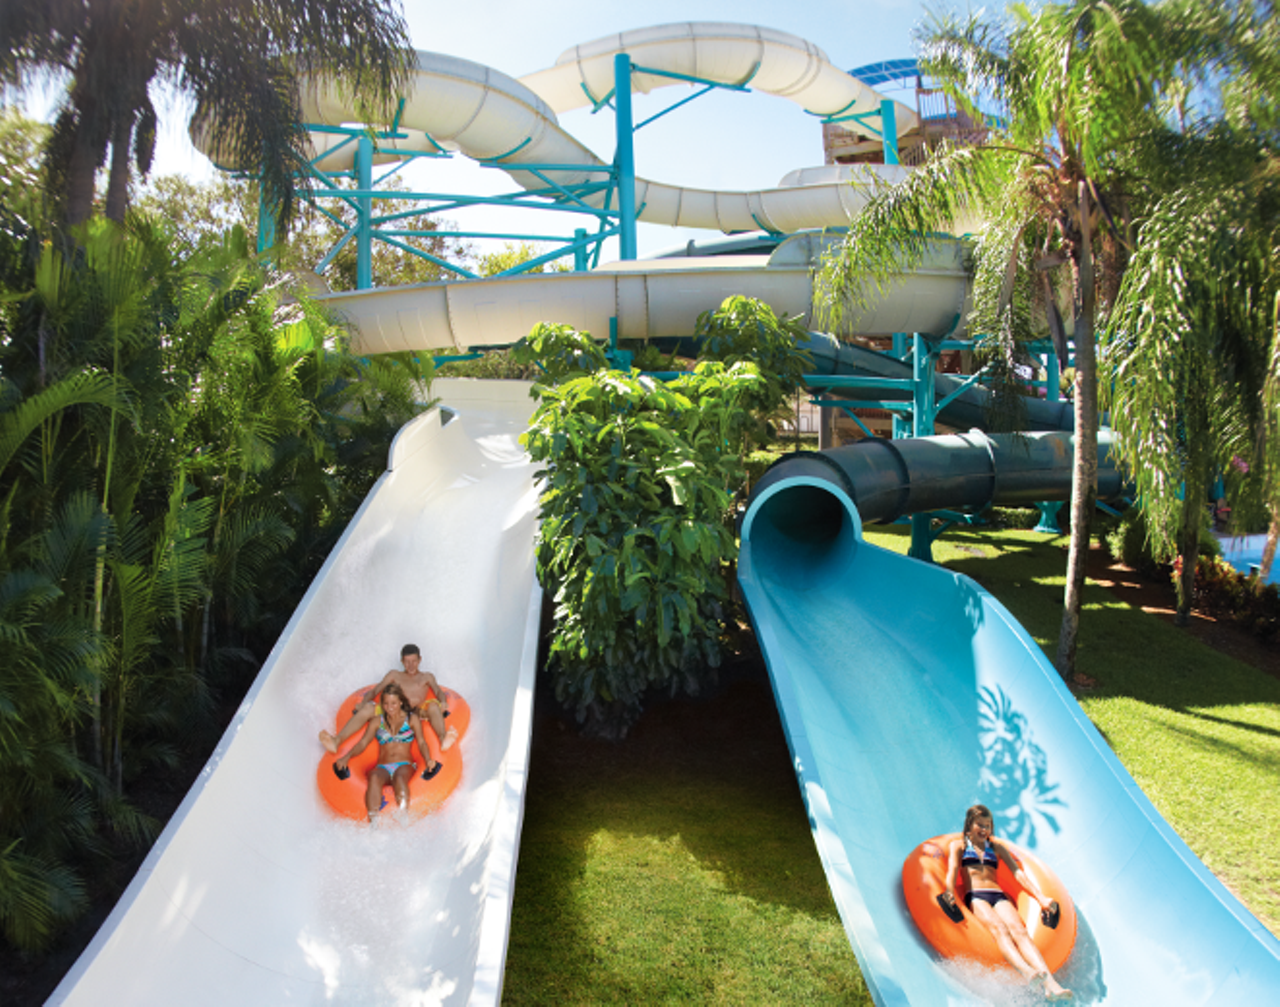 Adventure Island
10001 McKinley Dr, Tampa, FL 33612, (813) 884-4386
Adventure Island is the ultimate escape from the roasting summer sun. Forget how unsanitary water parks are and enjoy the many waterslides, lazy rivers, or the bar, while your kids enjoy those other activities. Margaritas taste great after accidentally swallowing pool water. 
Photo viaAdventure Island/Facebook